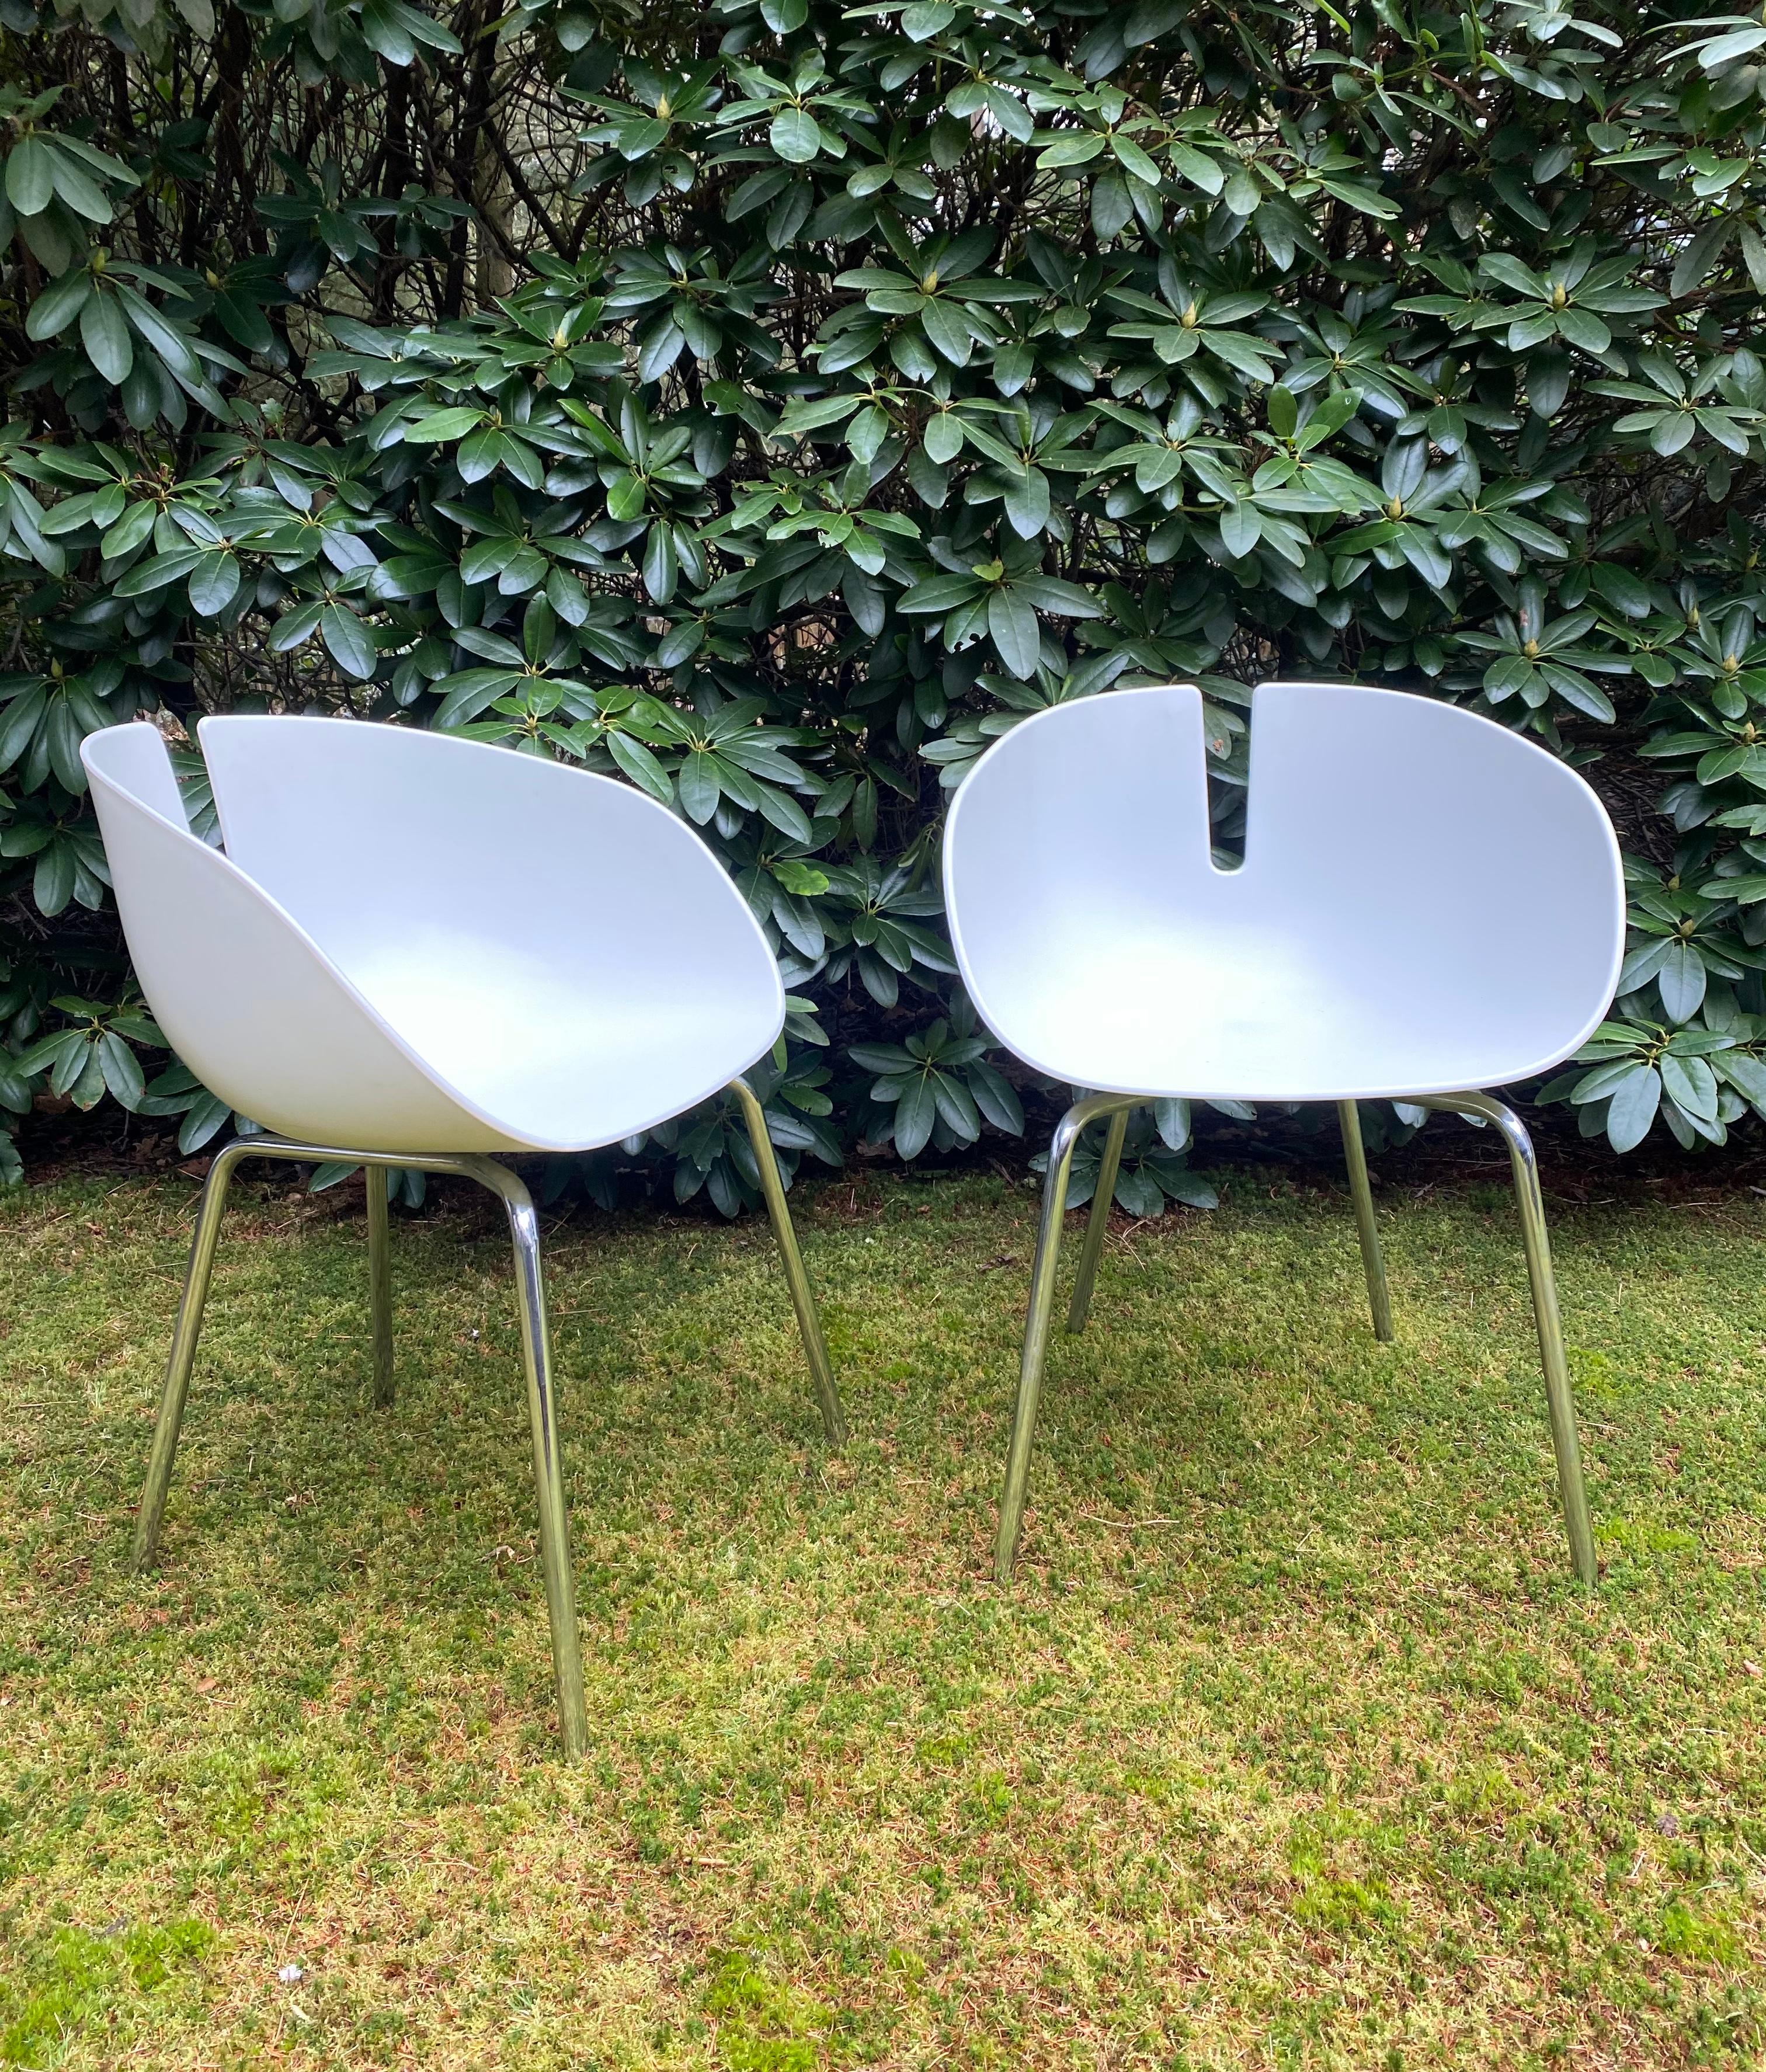 Set of Four White Moroso Chairs, Model Fjord, by Patricia Urquiola 2002 In Good Condition For Sale In Schagen, NL